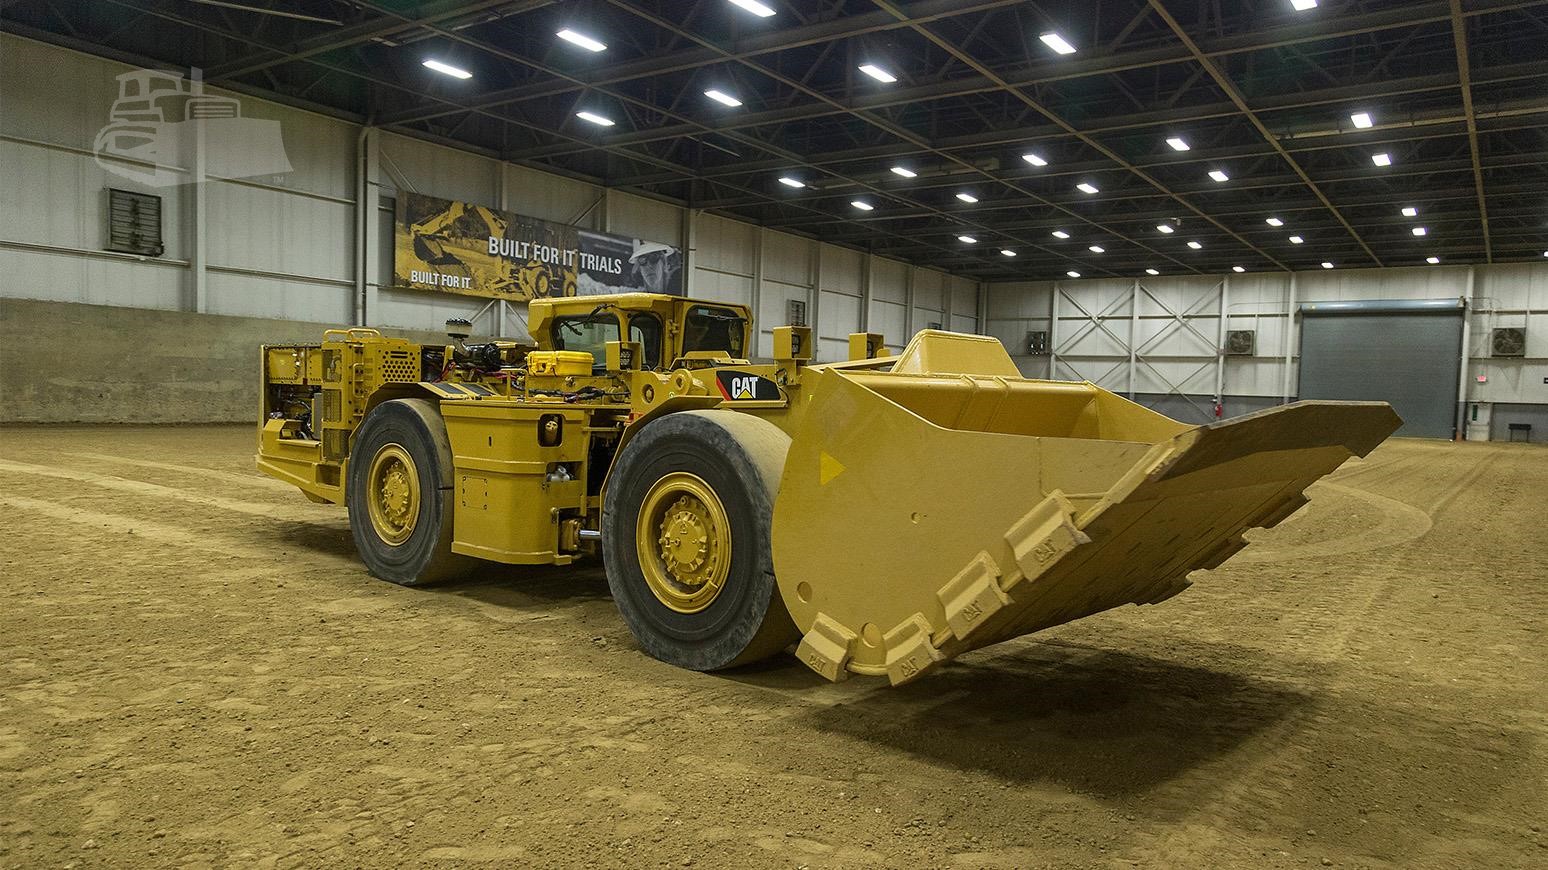 Caterpillar Introduces New R1700 XE ElectricDrive Underground Mining